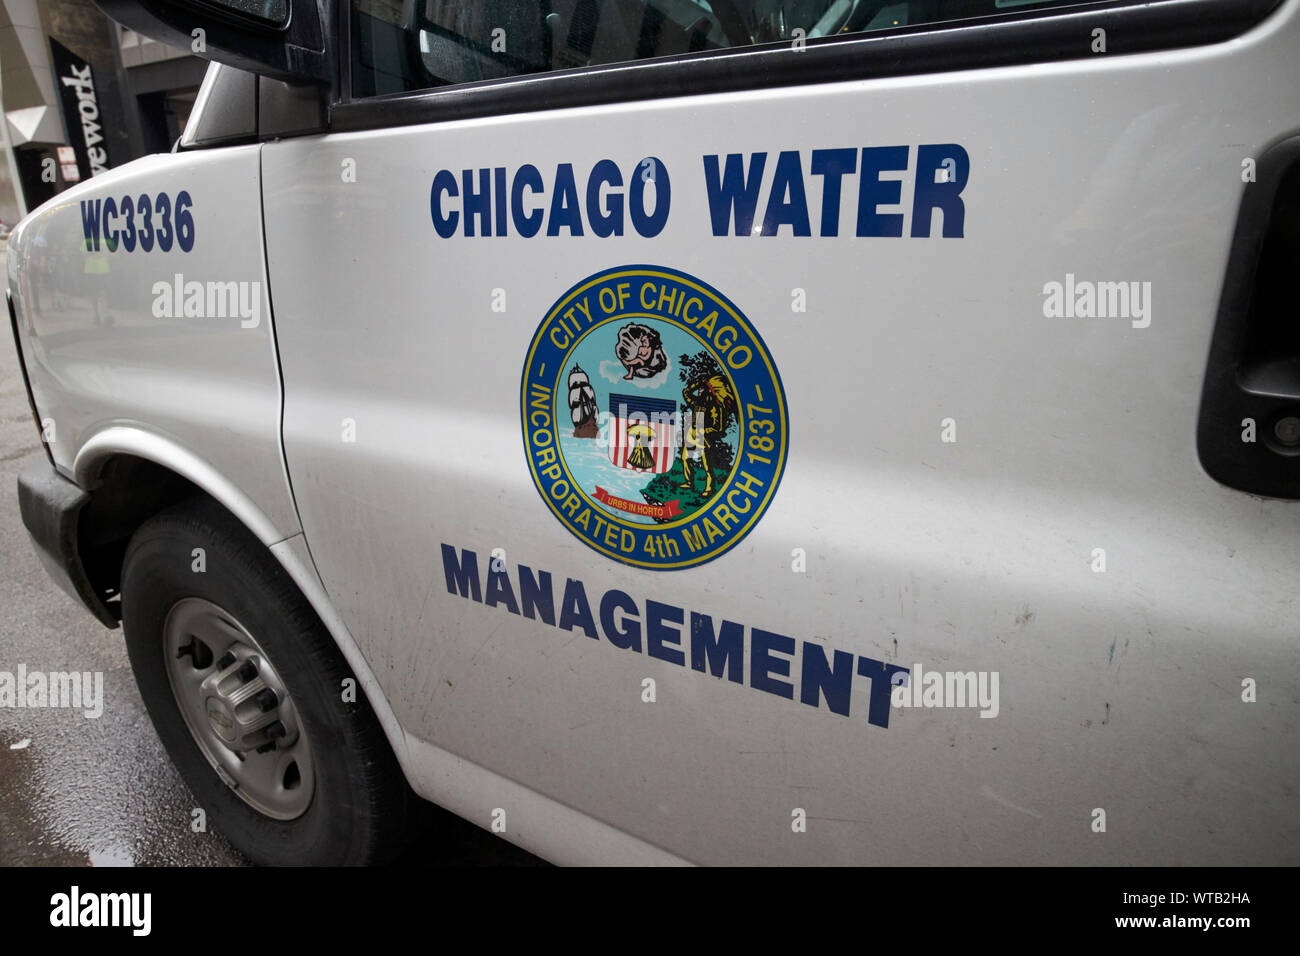 Chicago water management utility vehicle città di Chicago in Illinois USA Foto Stock